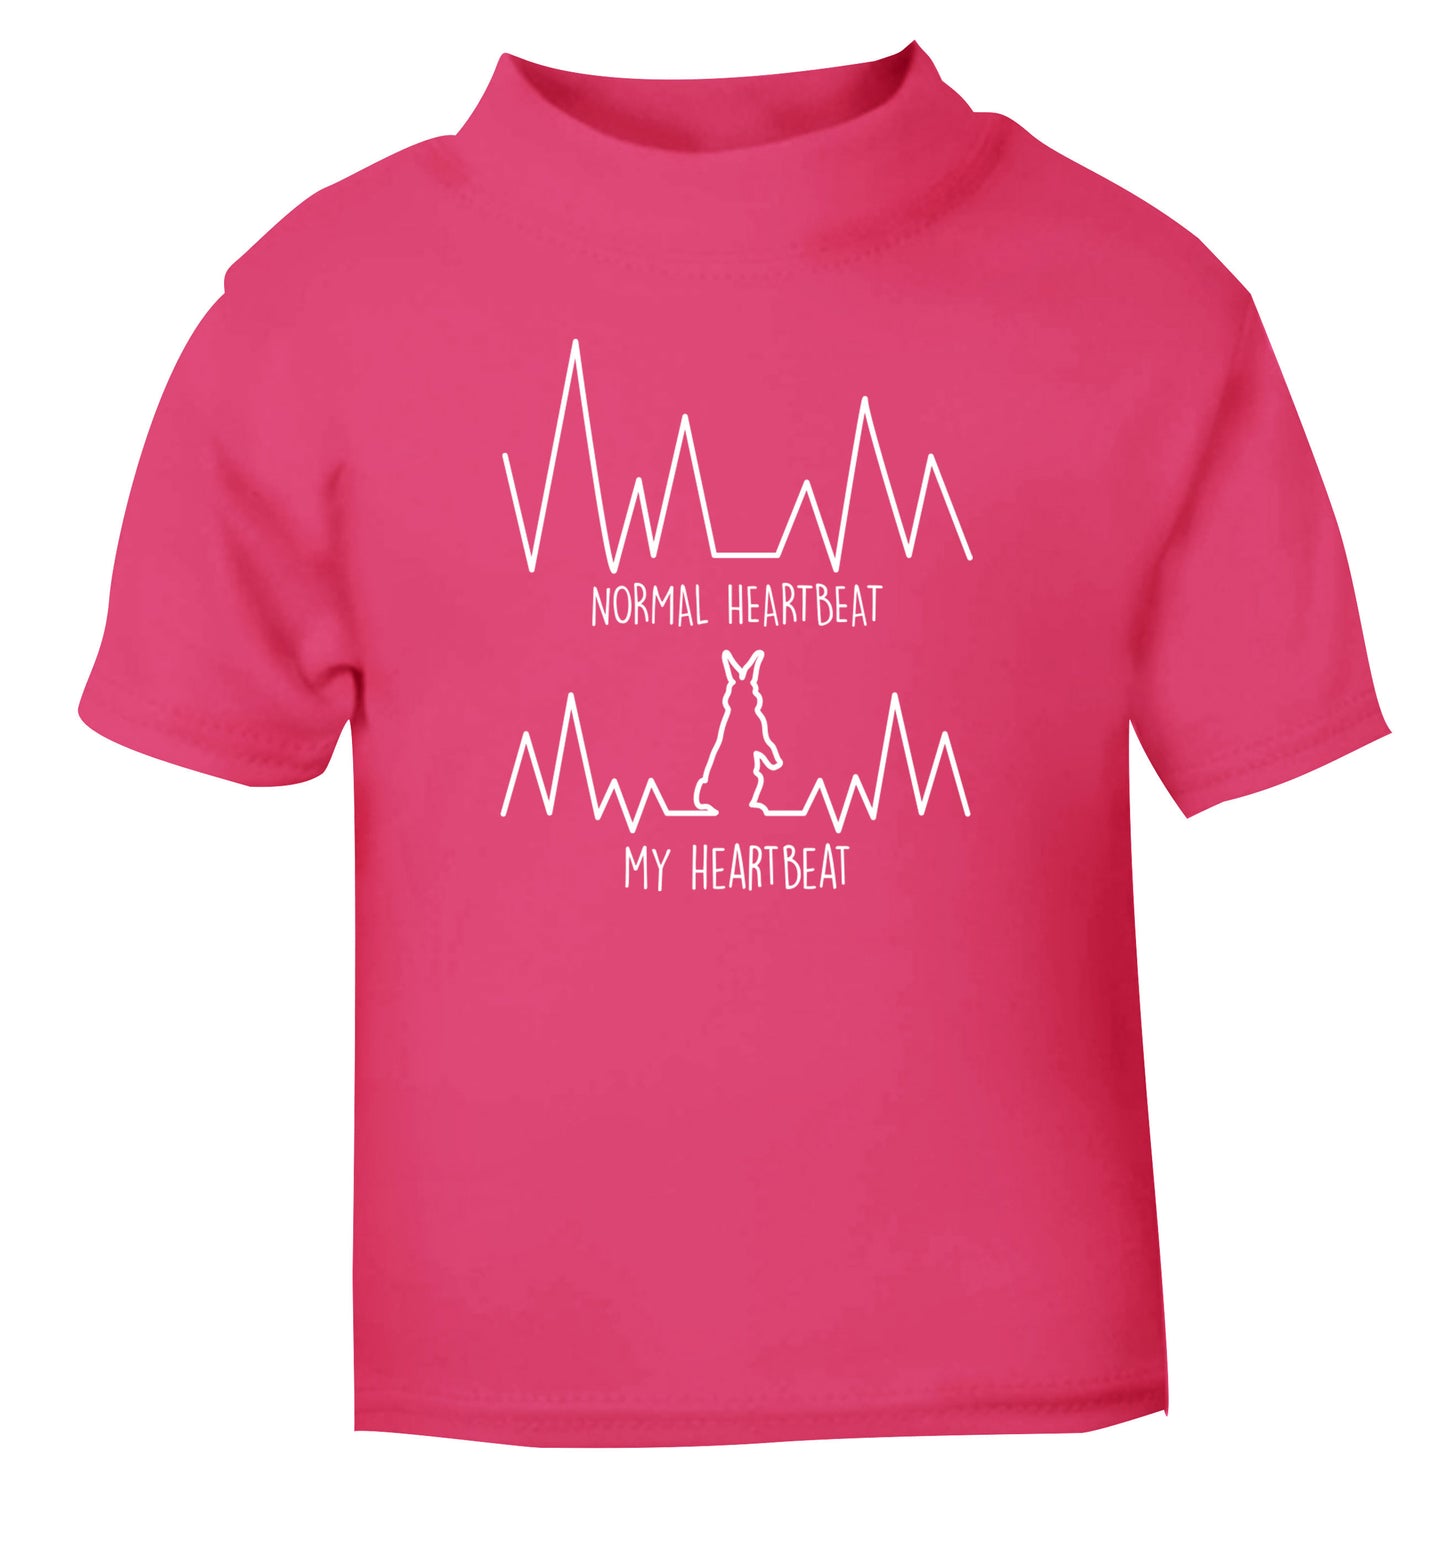 Normal heartbeat, my heartbeat rabbit lover pink Baby Toddler Tshirt 2 Years